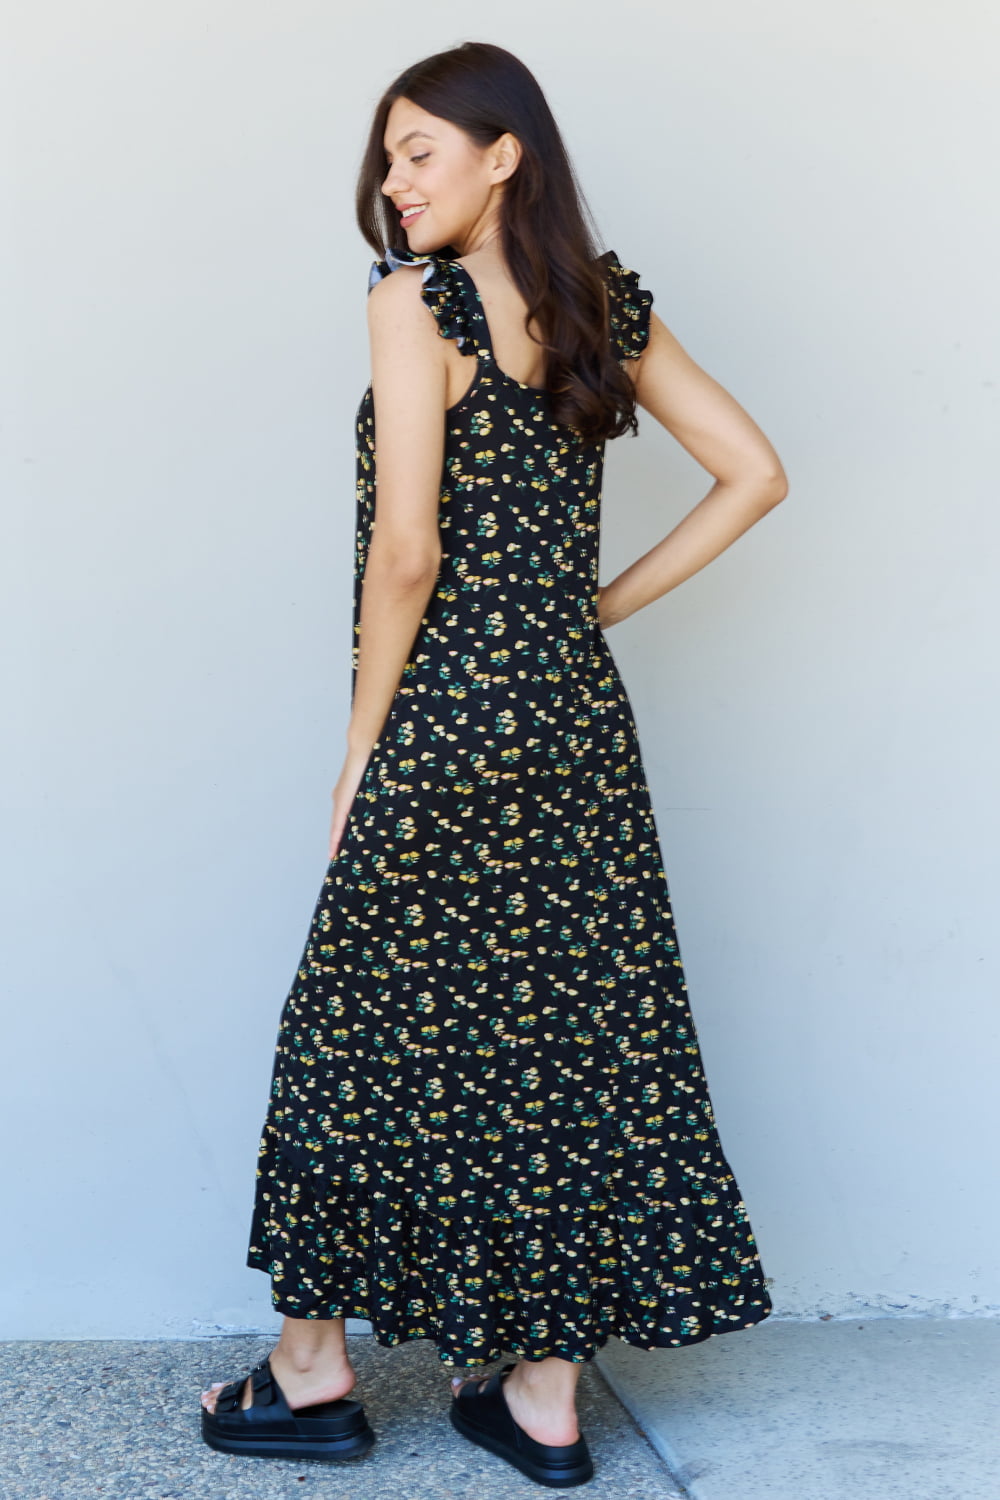 The Garden Ruffle Floral Maxi Dress in Black Yellow Floral - All Dresses - Dresses - 2 - 2024